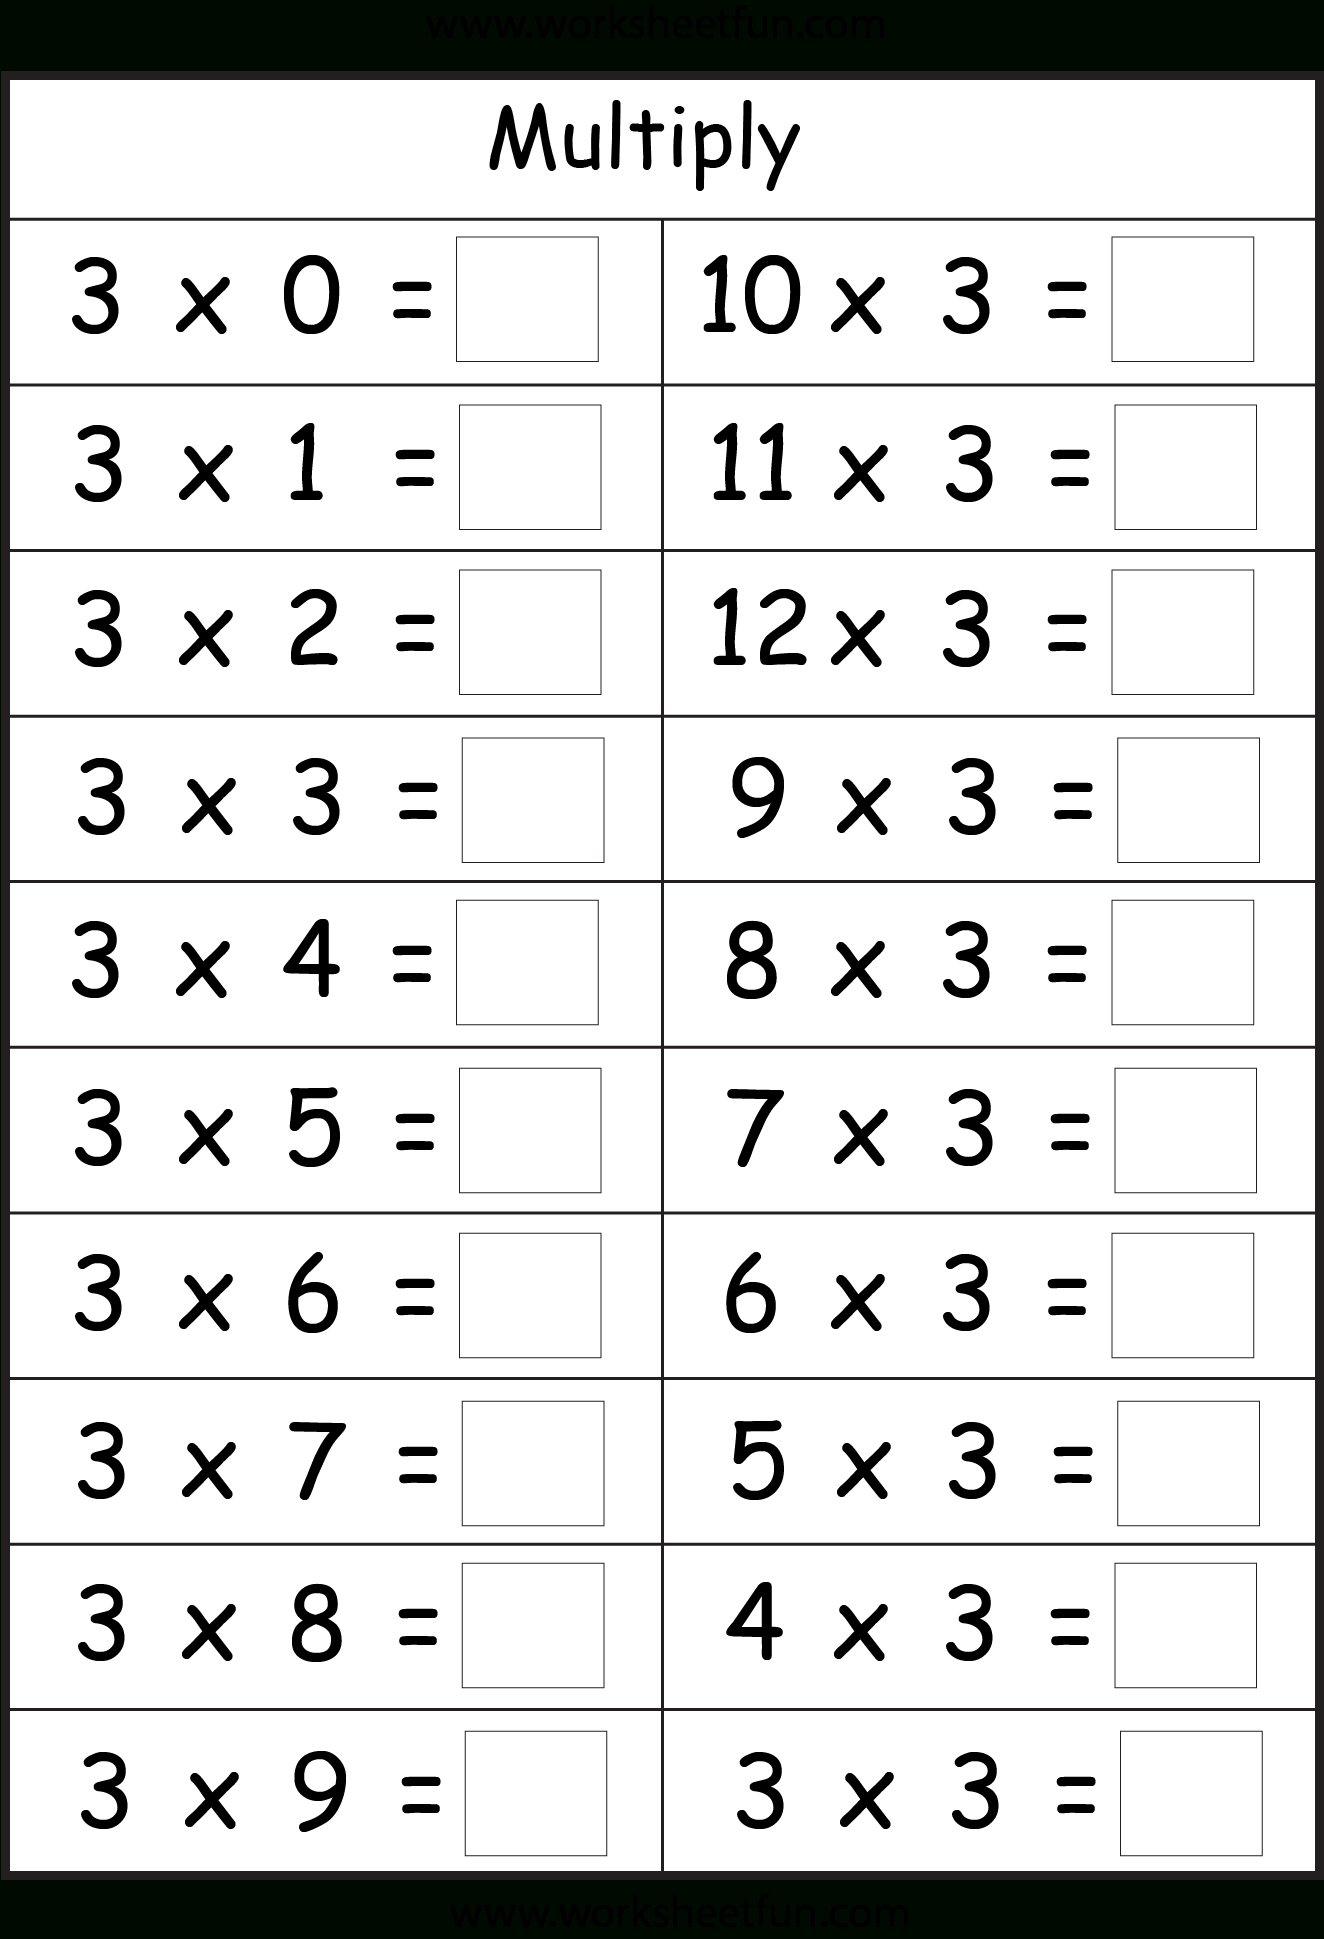 multiply-by-3-worksheets